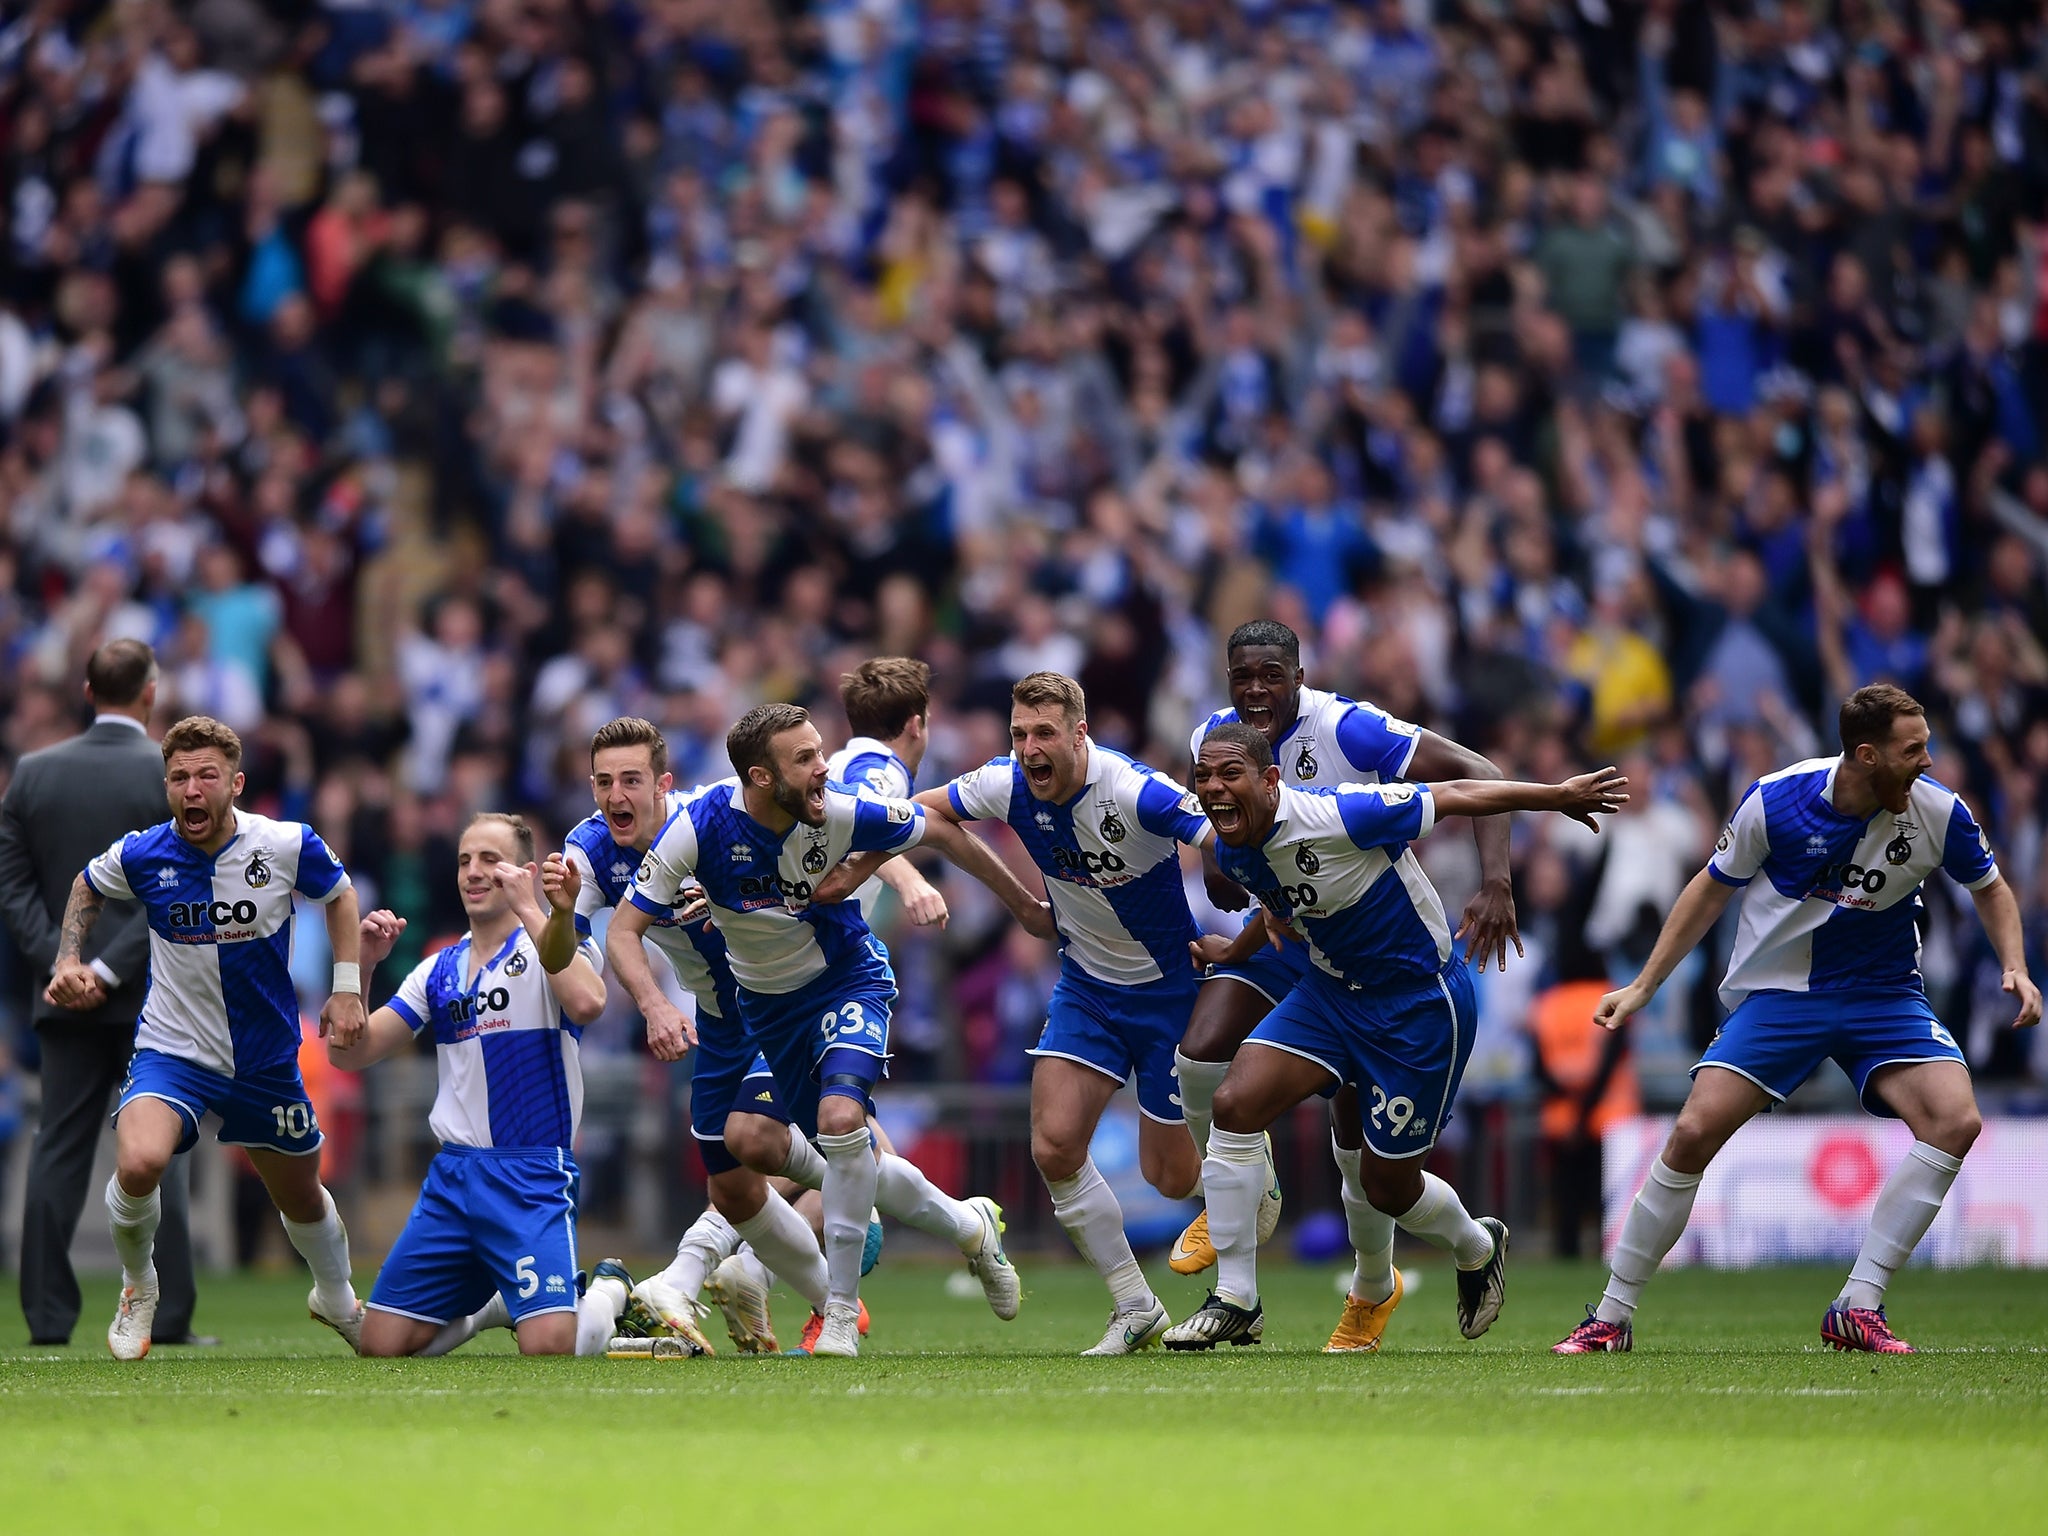 Bristol Rovers celebrate victory over Grimsby